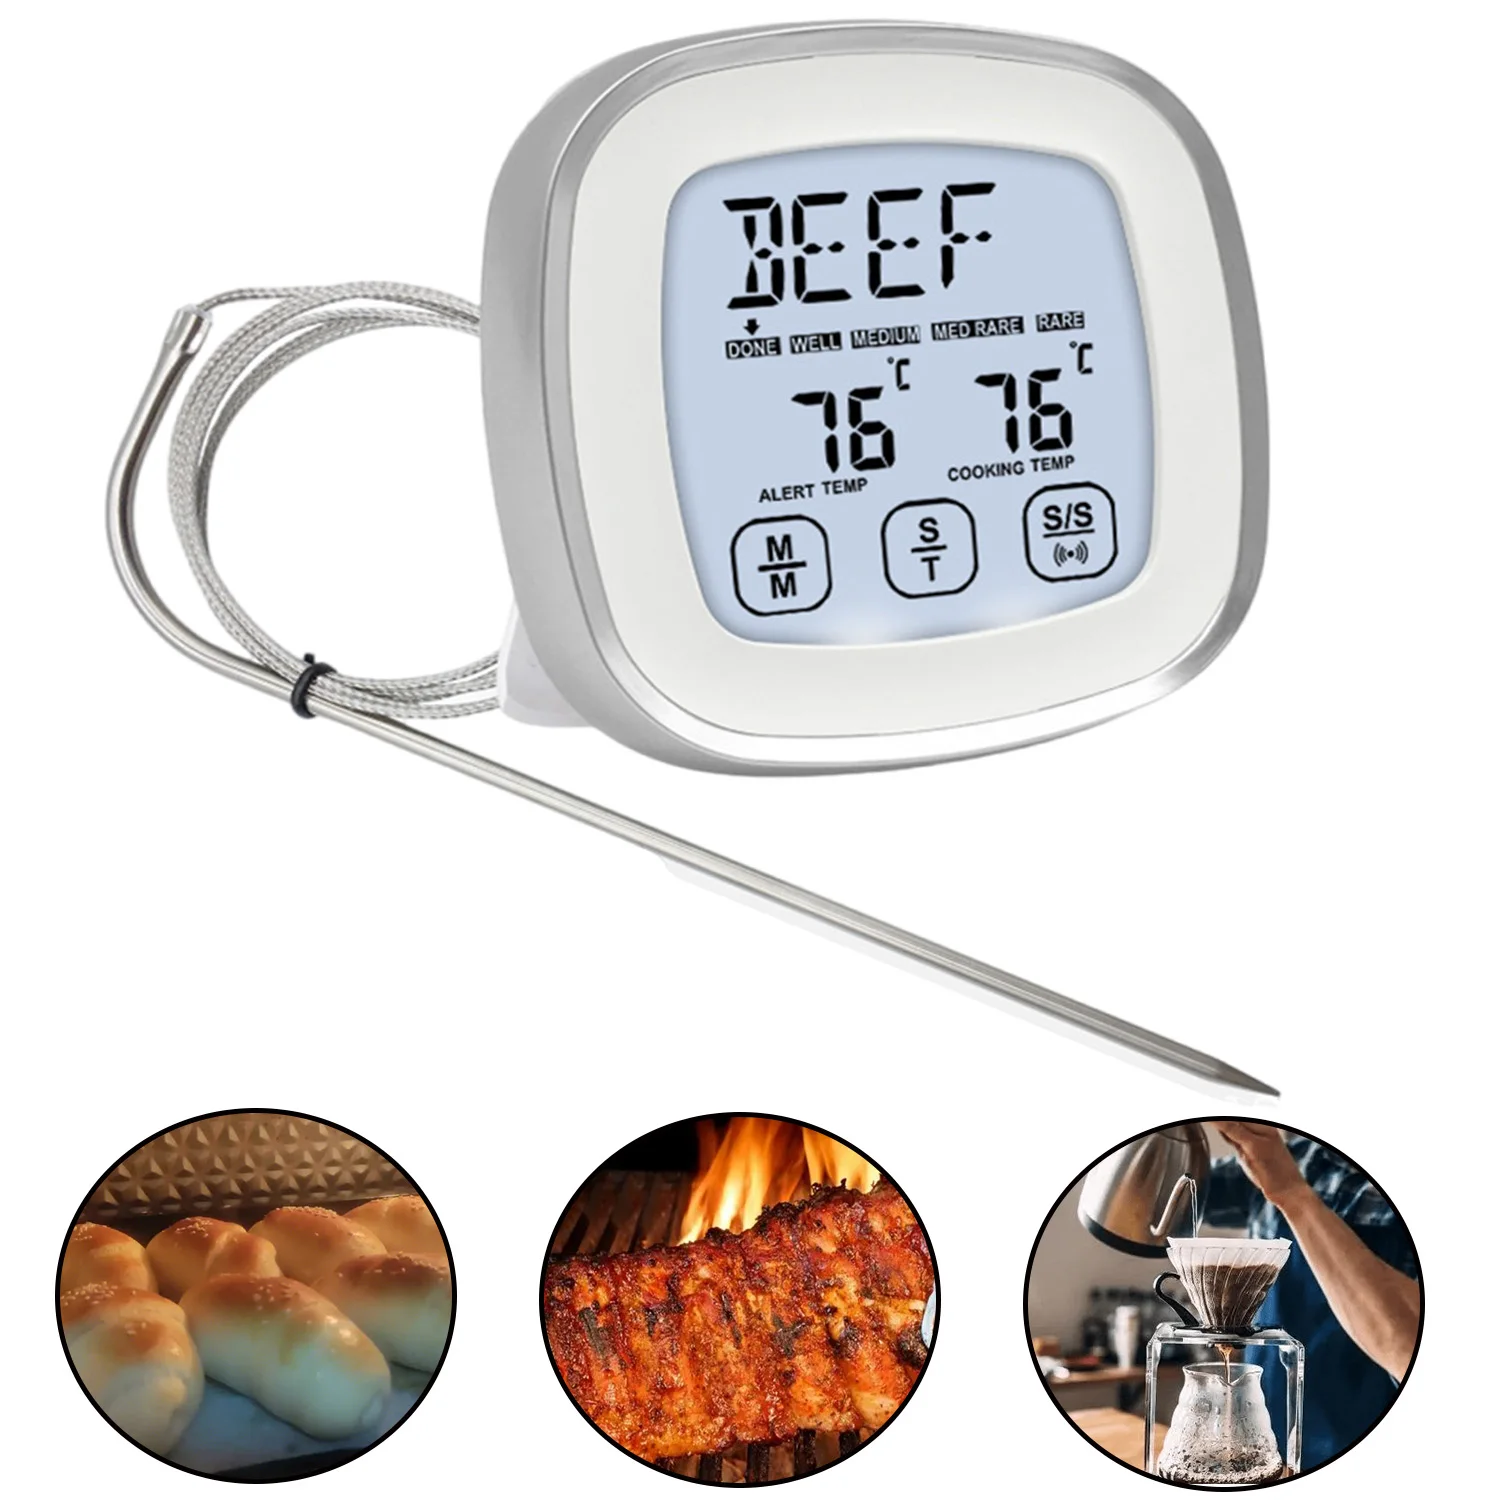 

Food Thermometer,Measurement Range 0℃~250℃,Waterproof Instant Read Thermometer for Kitchen Cooking Milk Coffee Barbecue Toast